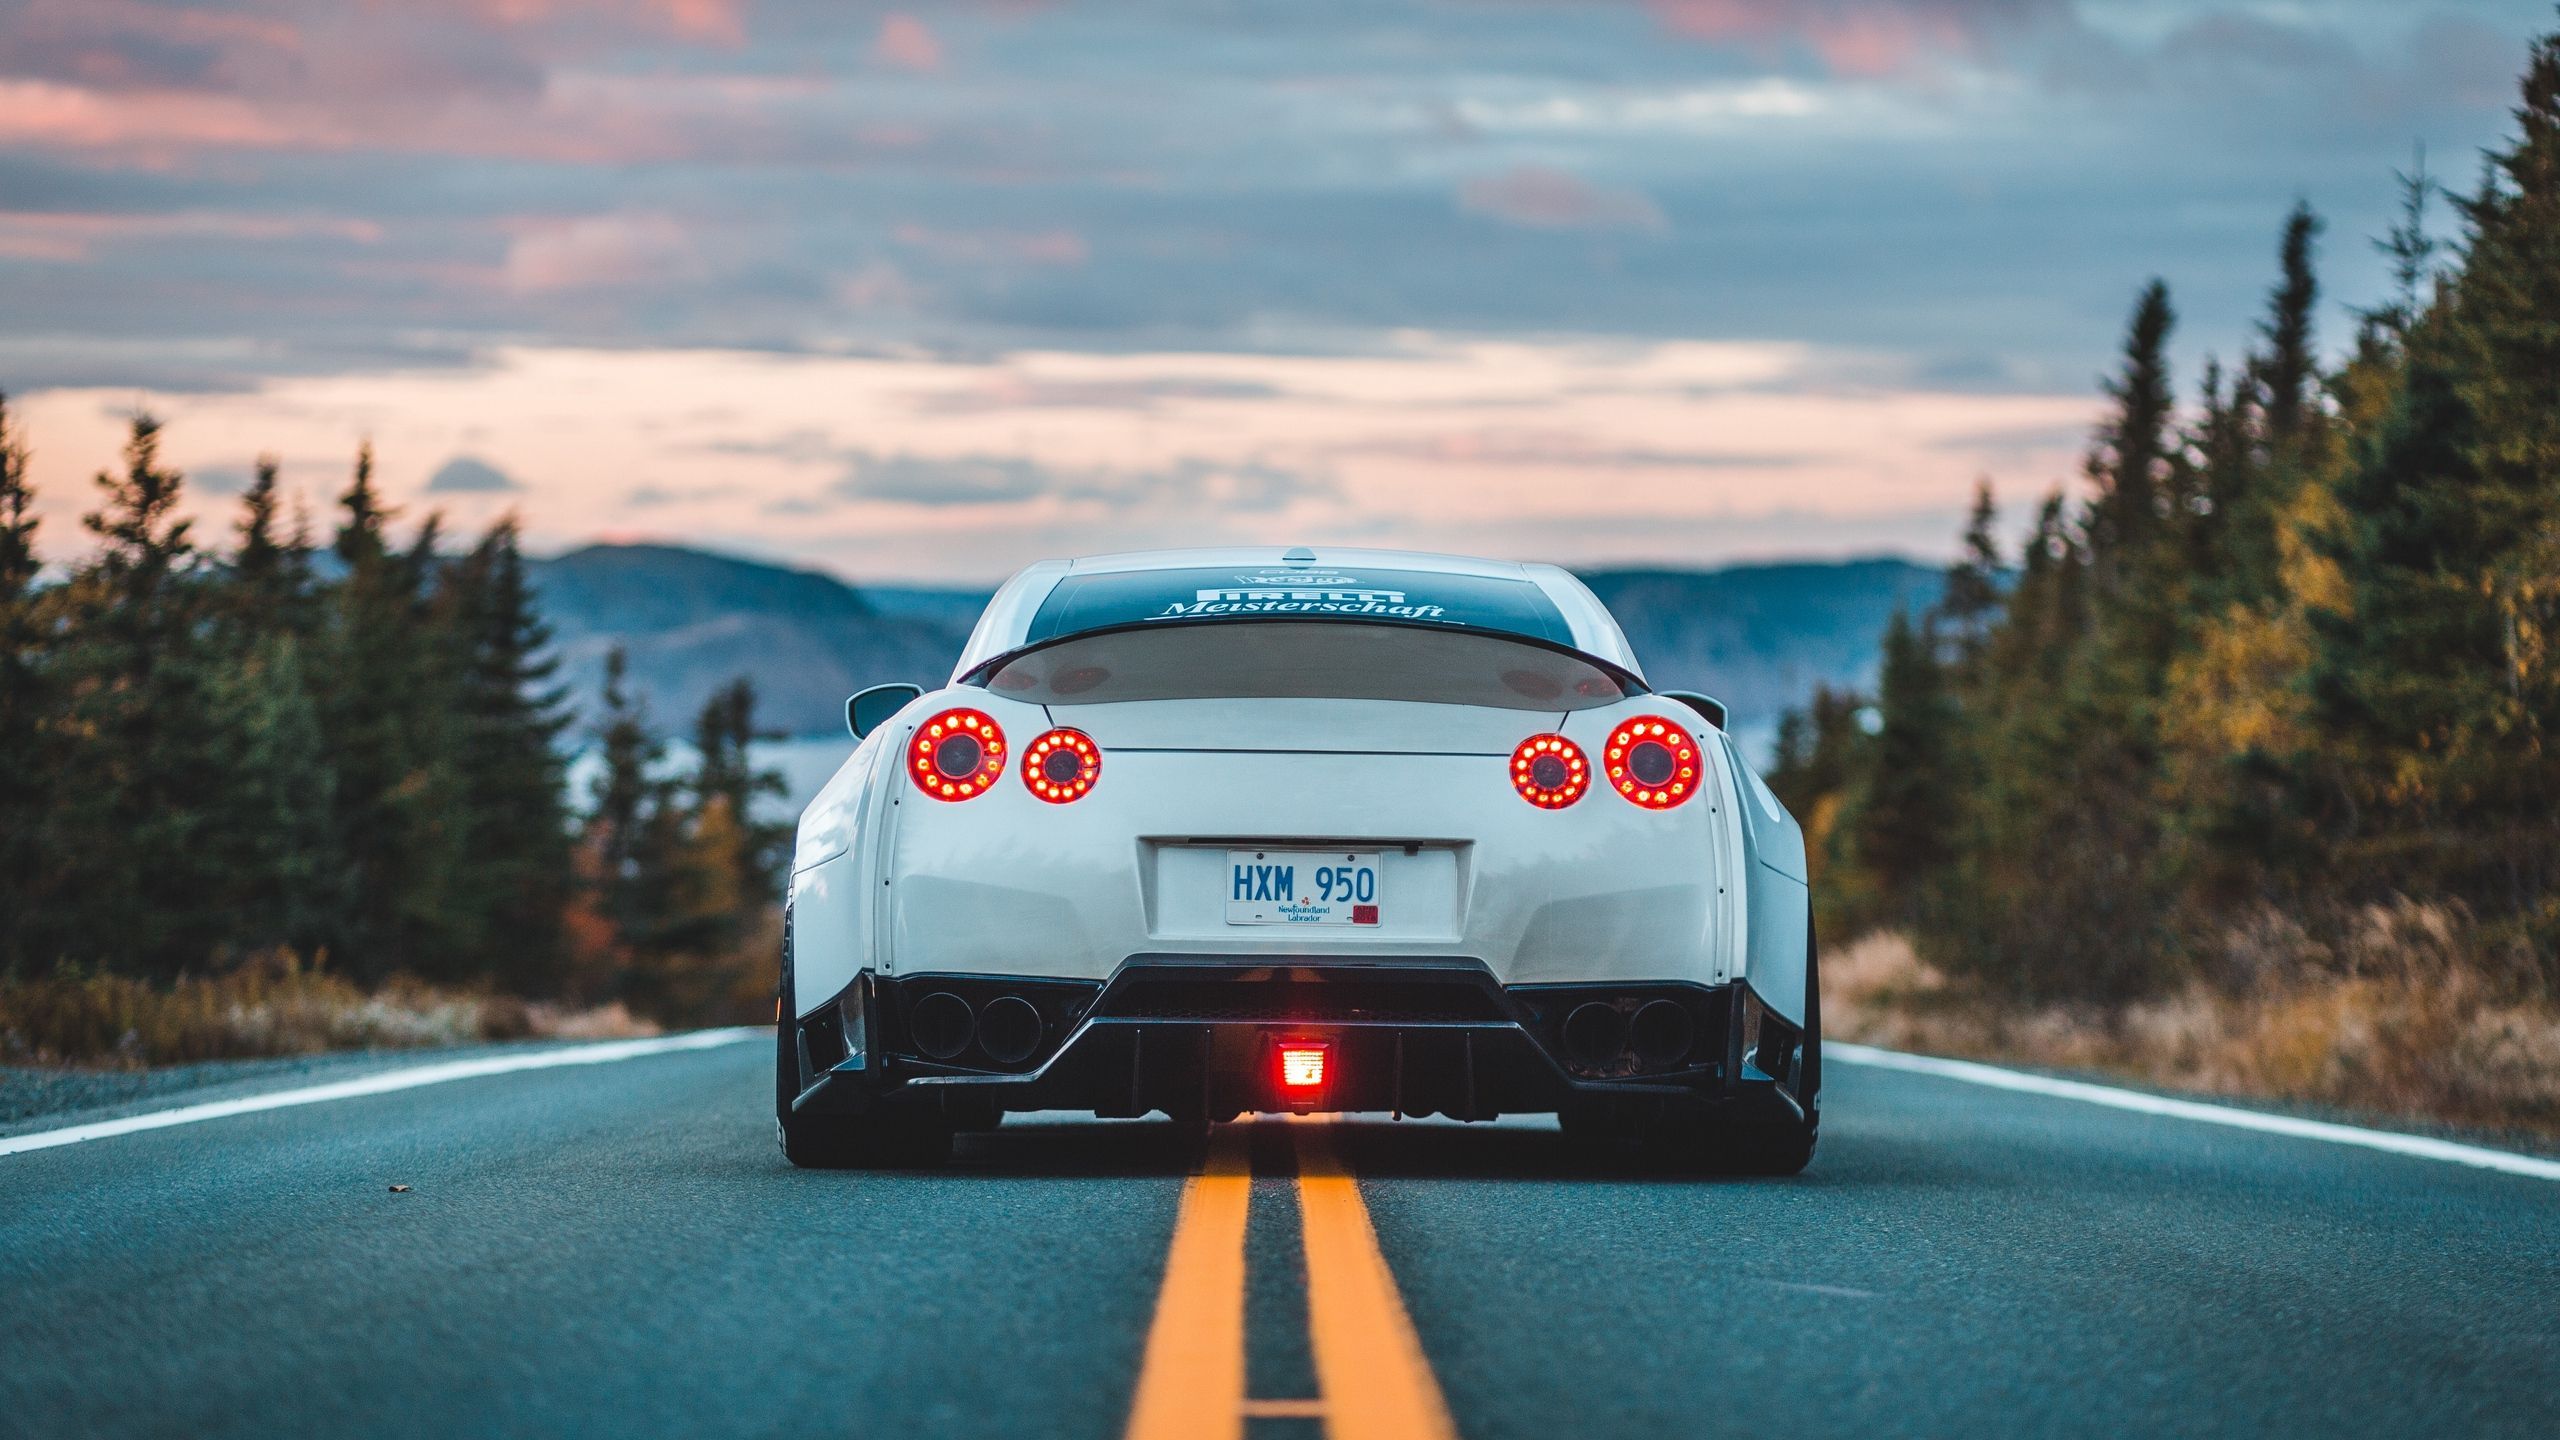 Car Aesthetic Wallpaper 4k - Rev Up Your Screens with Stunning Car ...